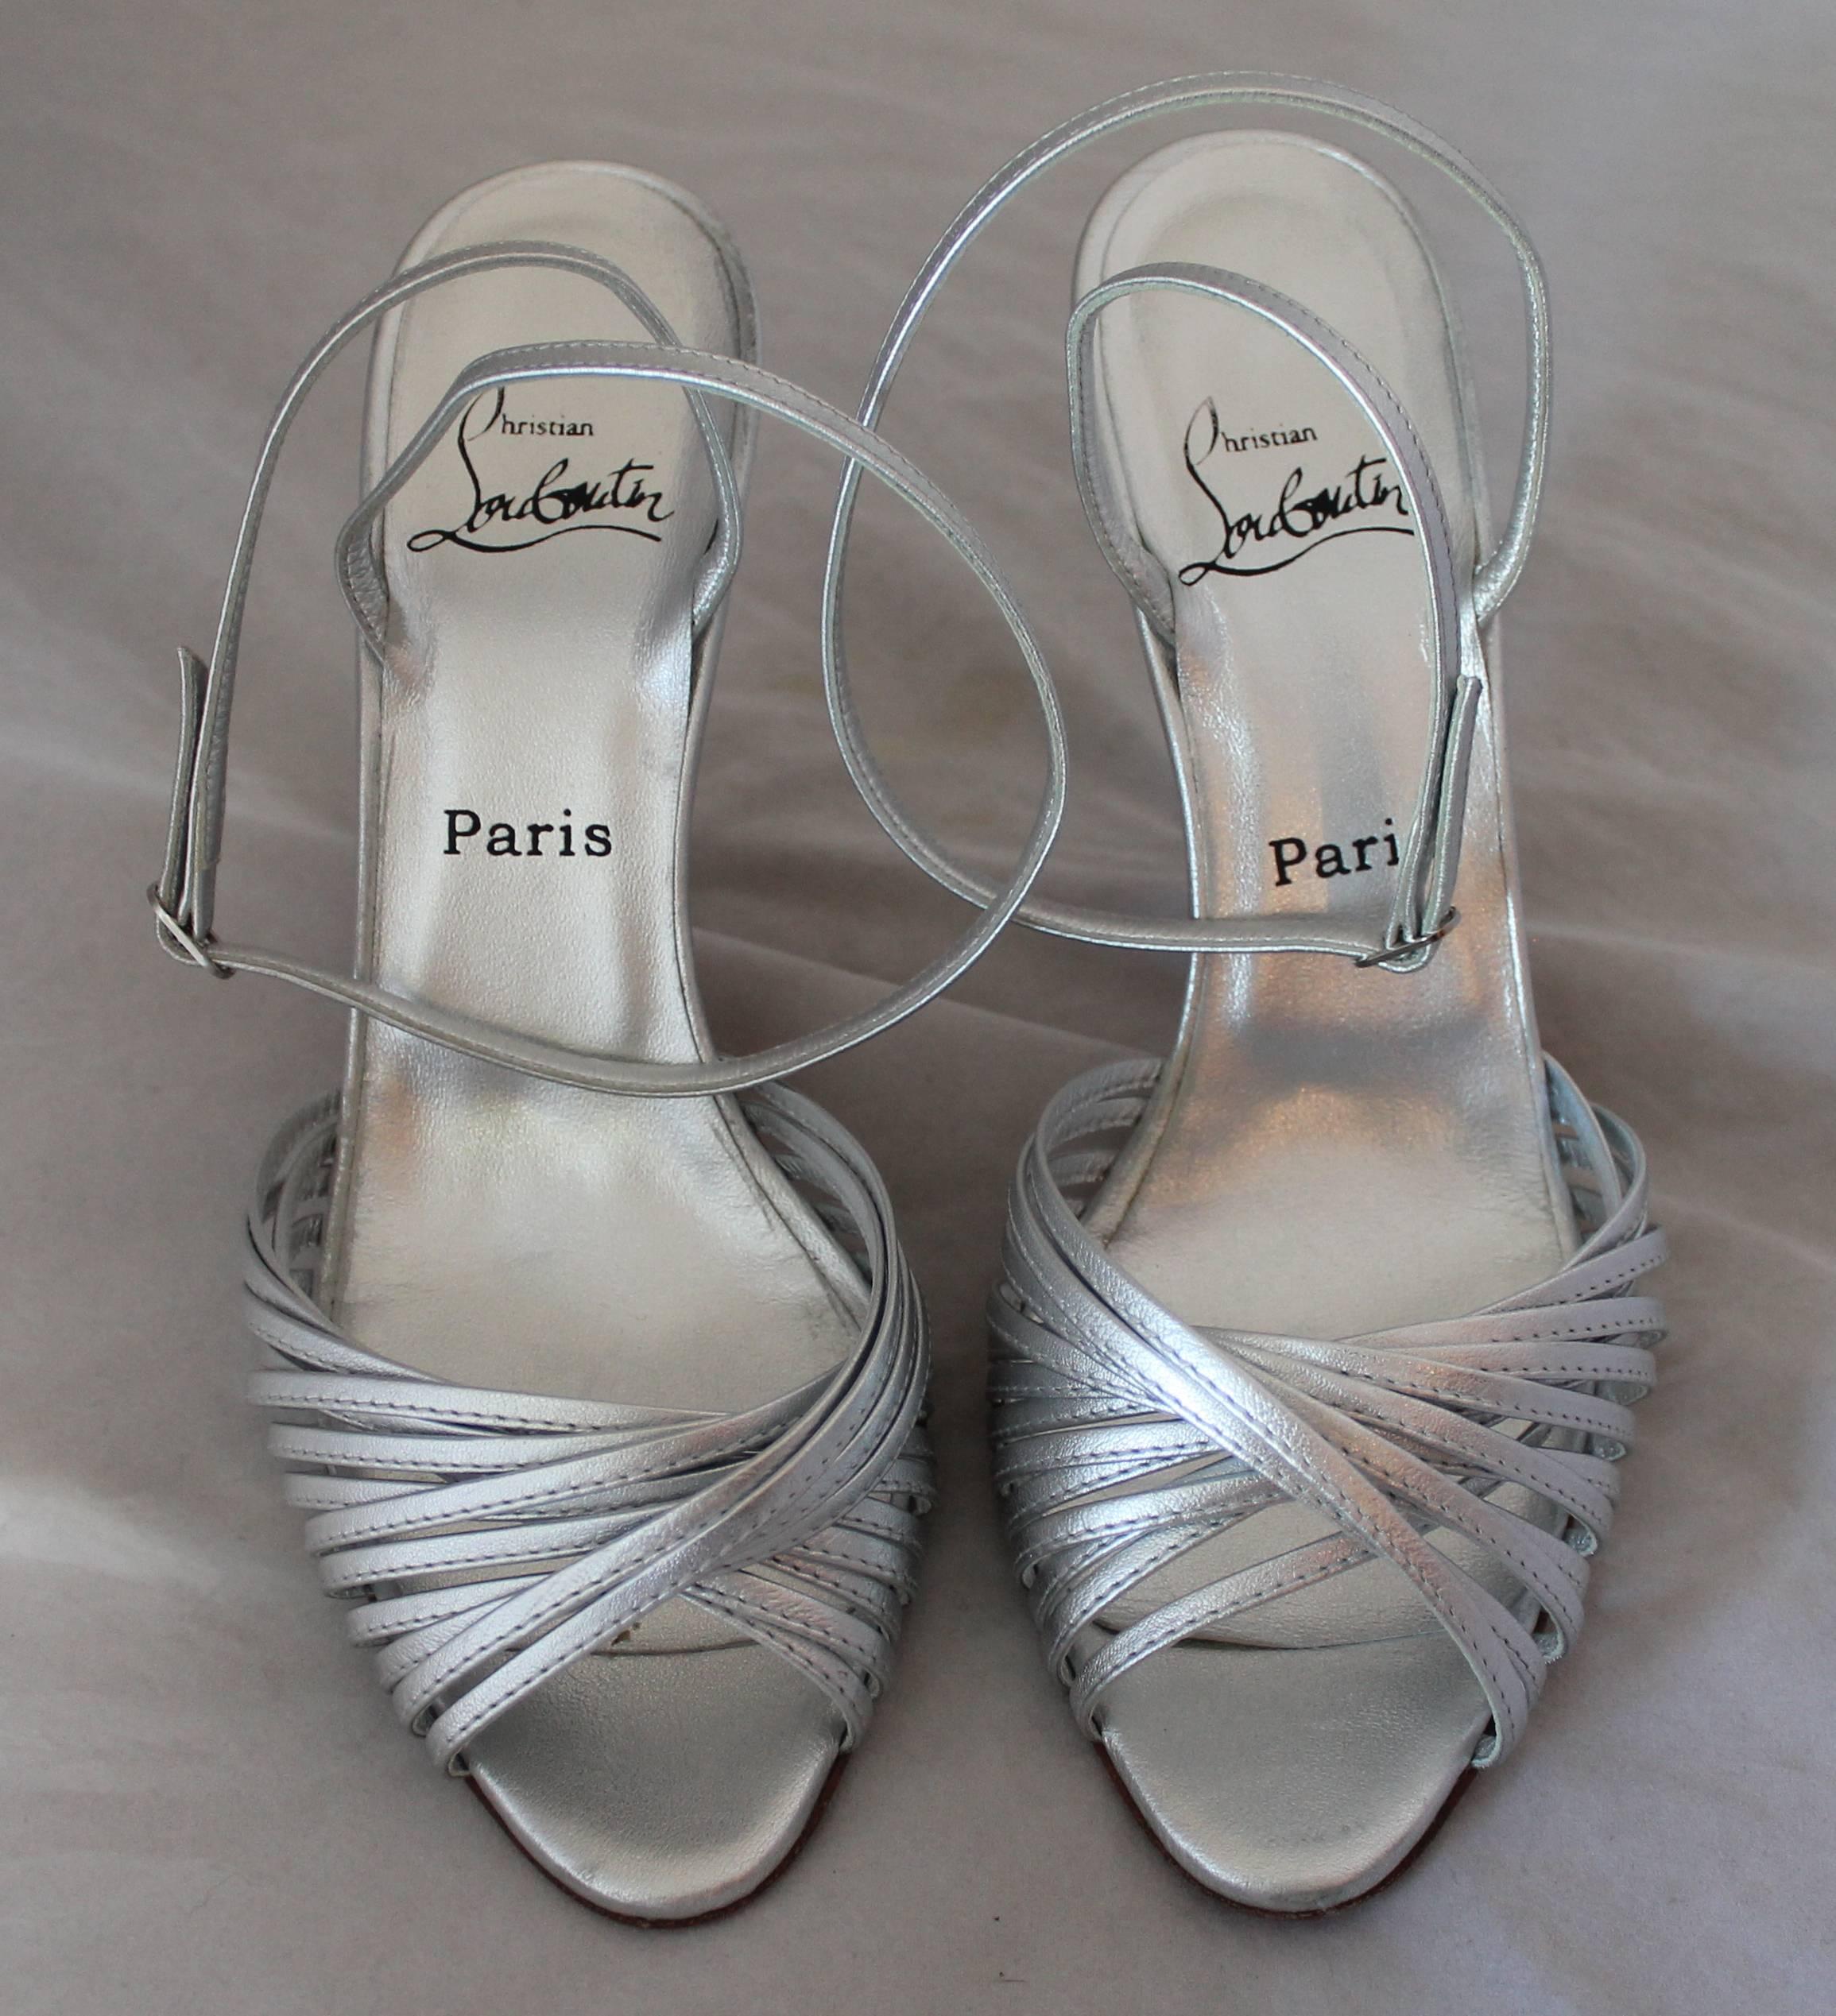 Christian Louboutin Silver Leather Ankle Strap Sandal - 39.5.  These beautiful shoes are barely worn, in excellent condition.  They have an elegant ankle strap and a front crossover multi strap.

Measurements:
Heel: 4